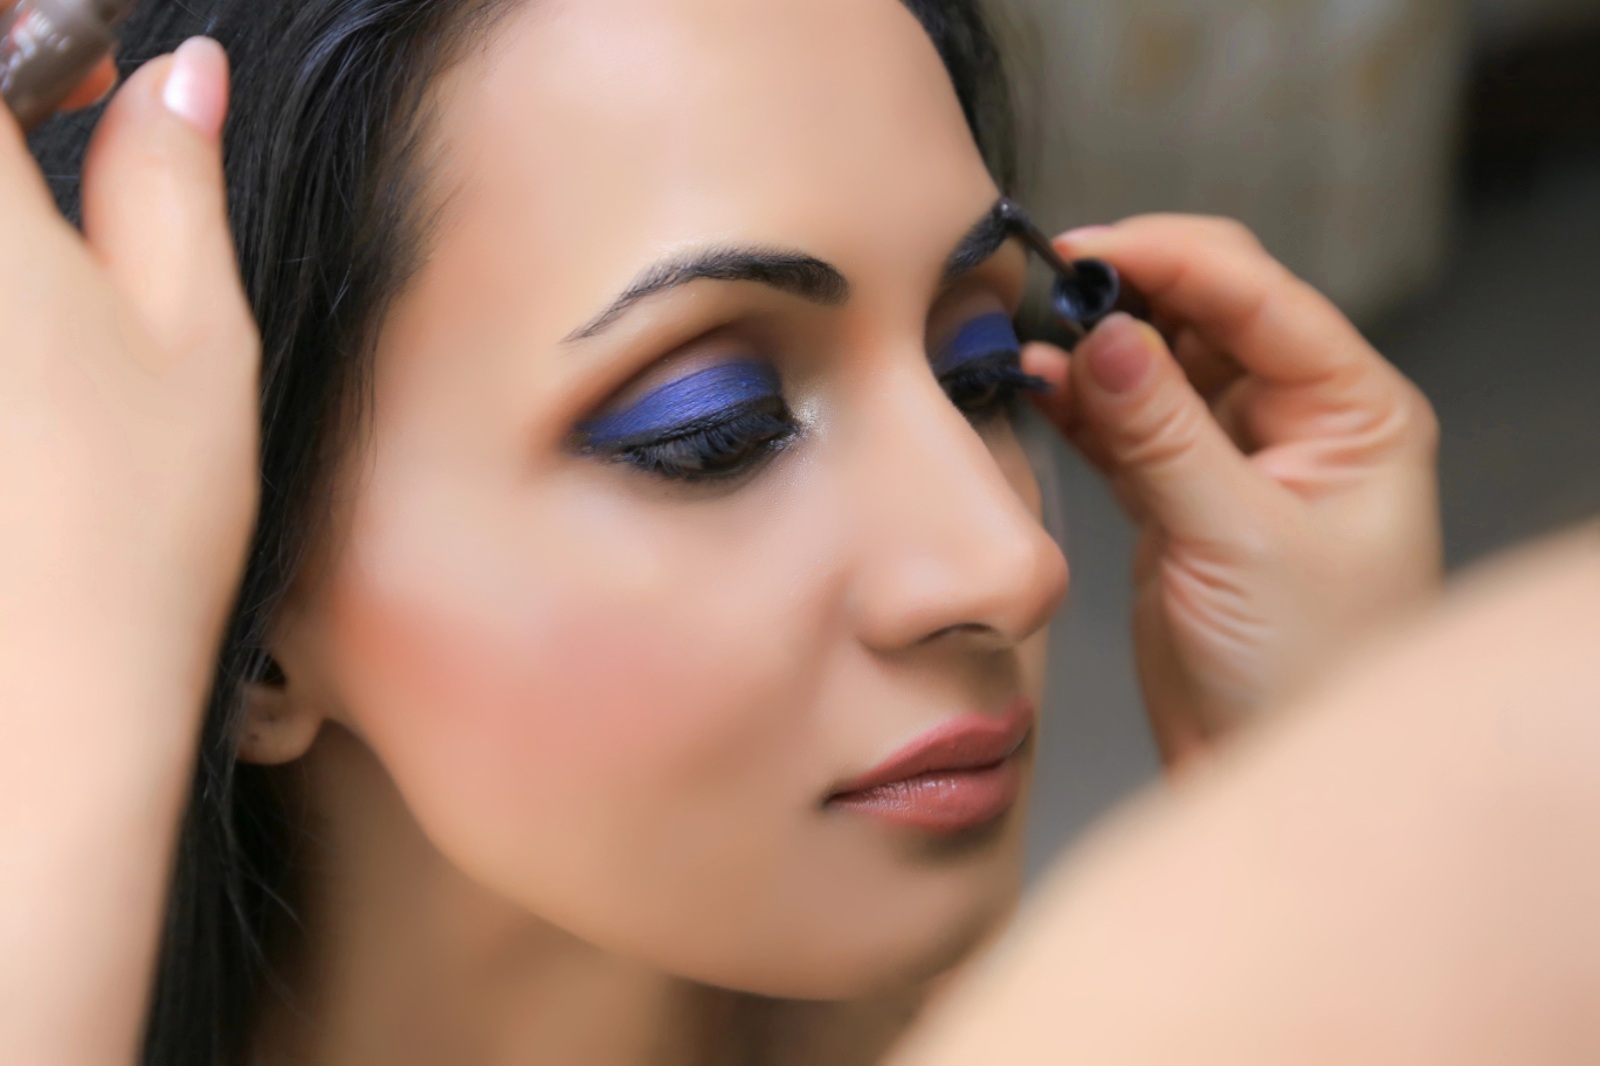 How to Rock the Blue Eyeshadow Trend